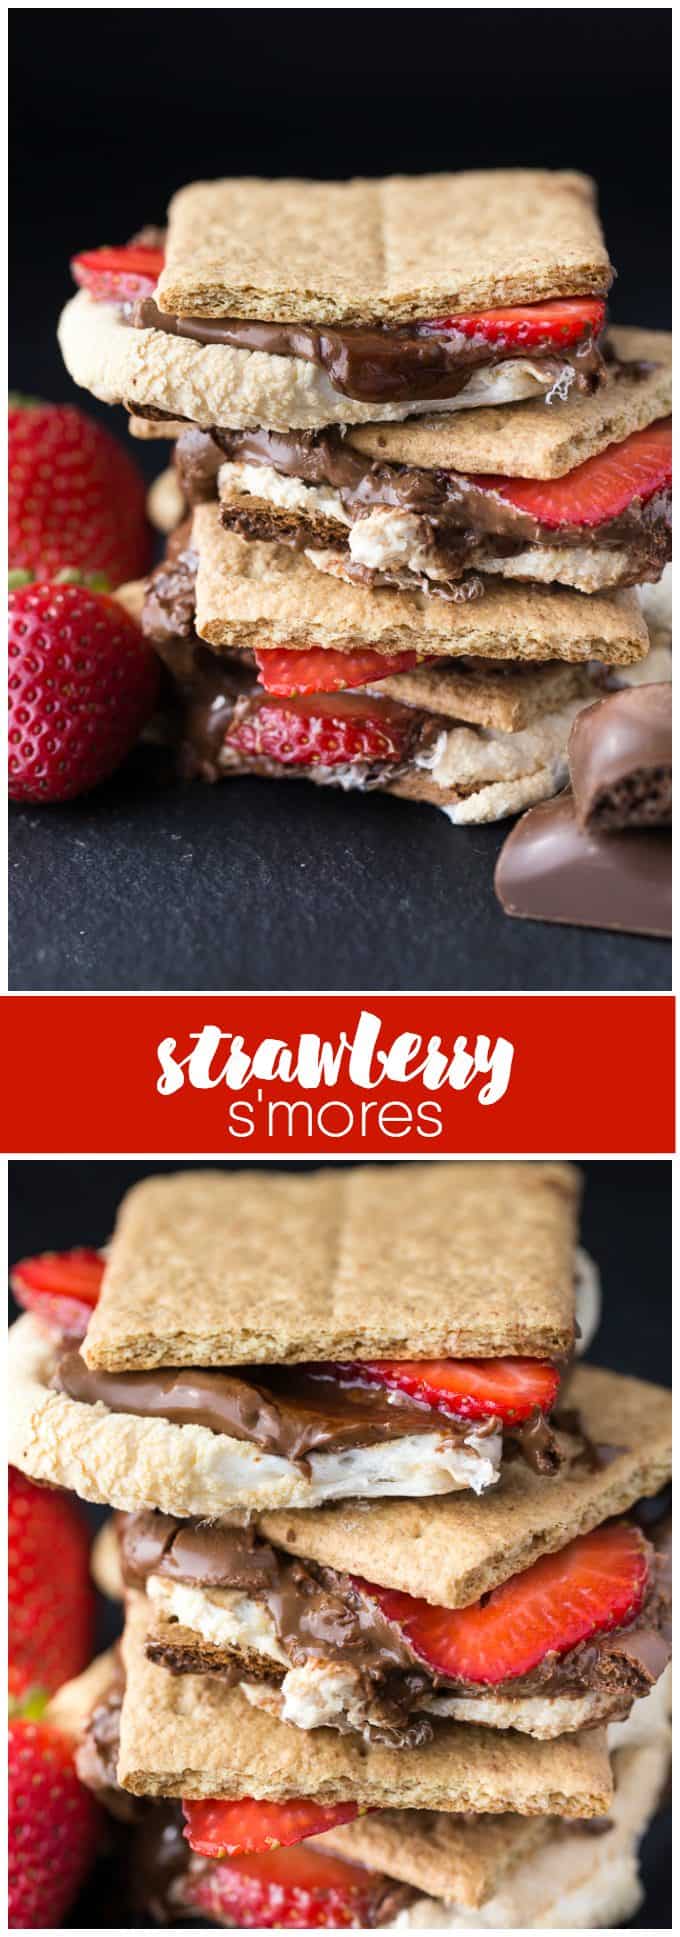 Strawberry S'mores - Ridiculously easy and delicious! Add some sliced strawberries to your next batch of s'mores for an extra burst of sweetness.